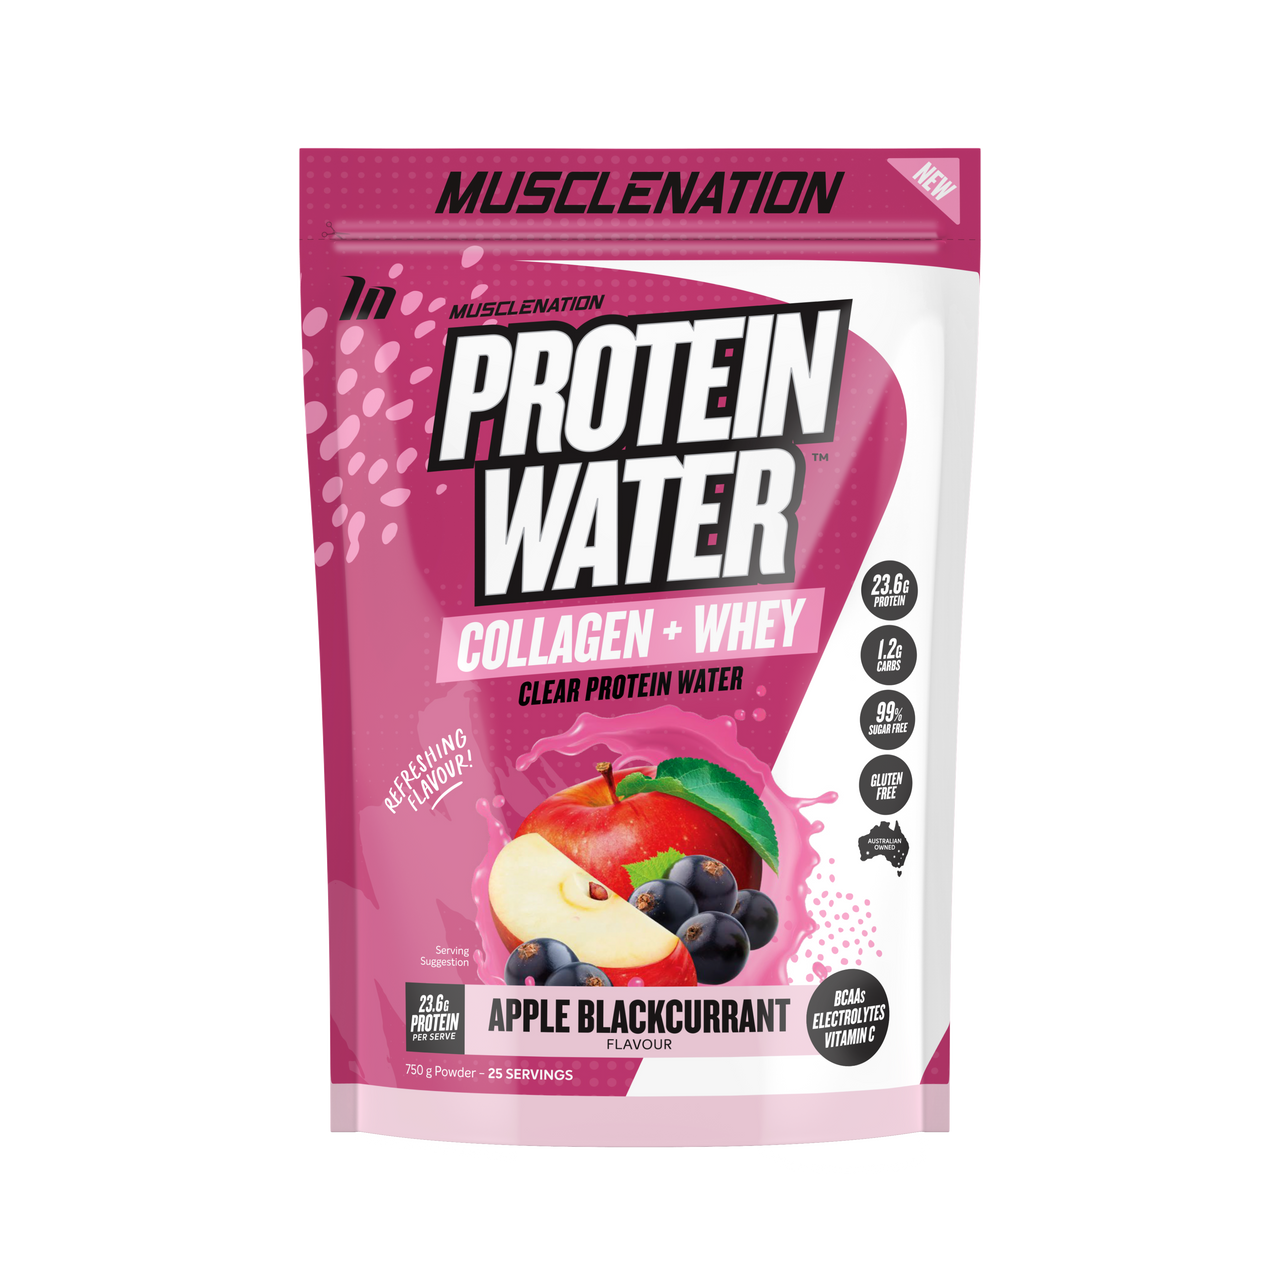 Muscle Nation Protein Water - Super Nutrition